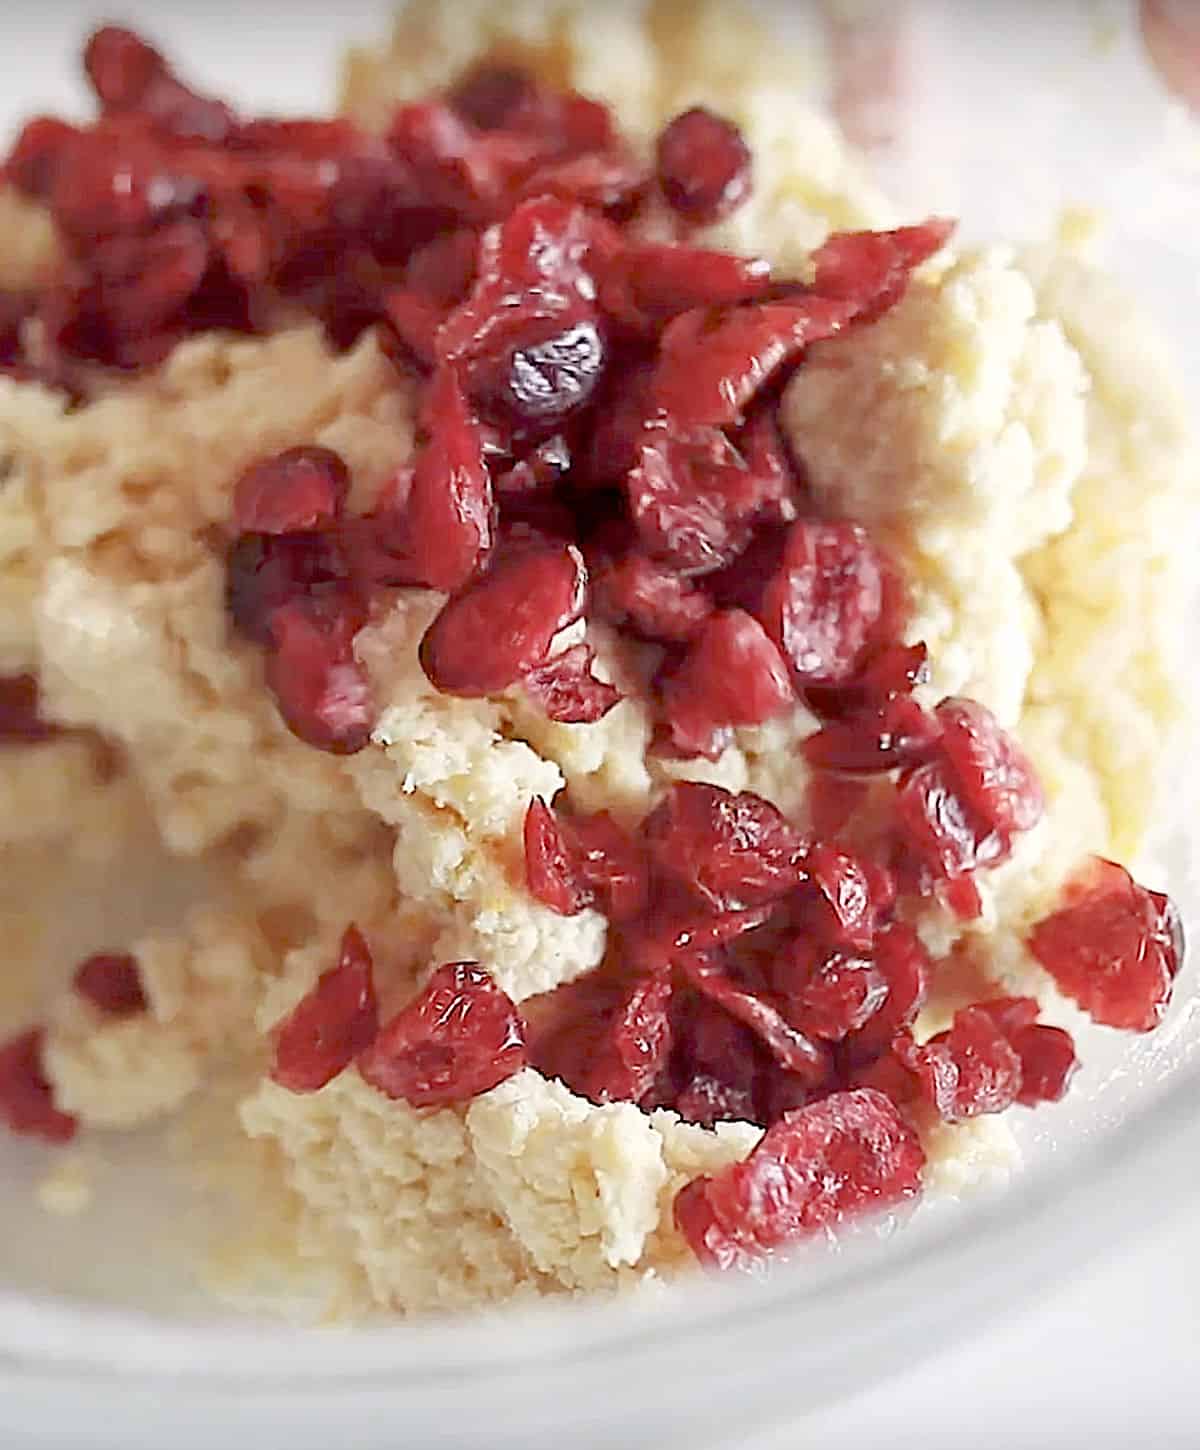 Dried cranberries added to scone dough in a glass bowl. Close up image.